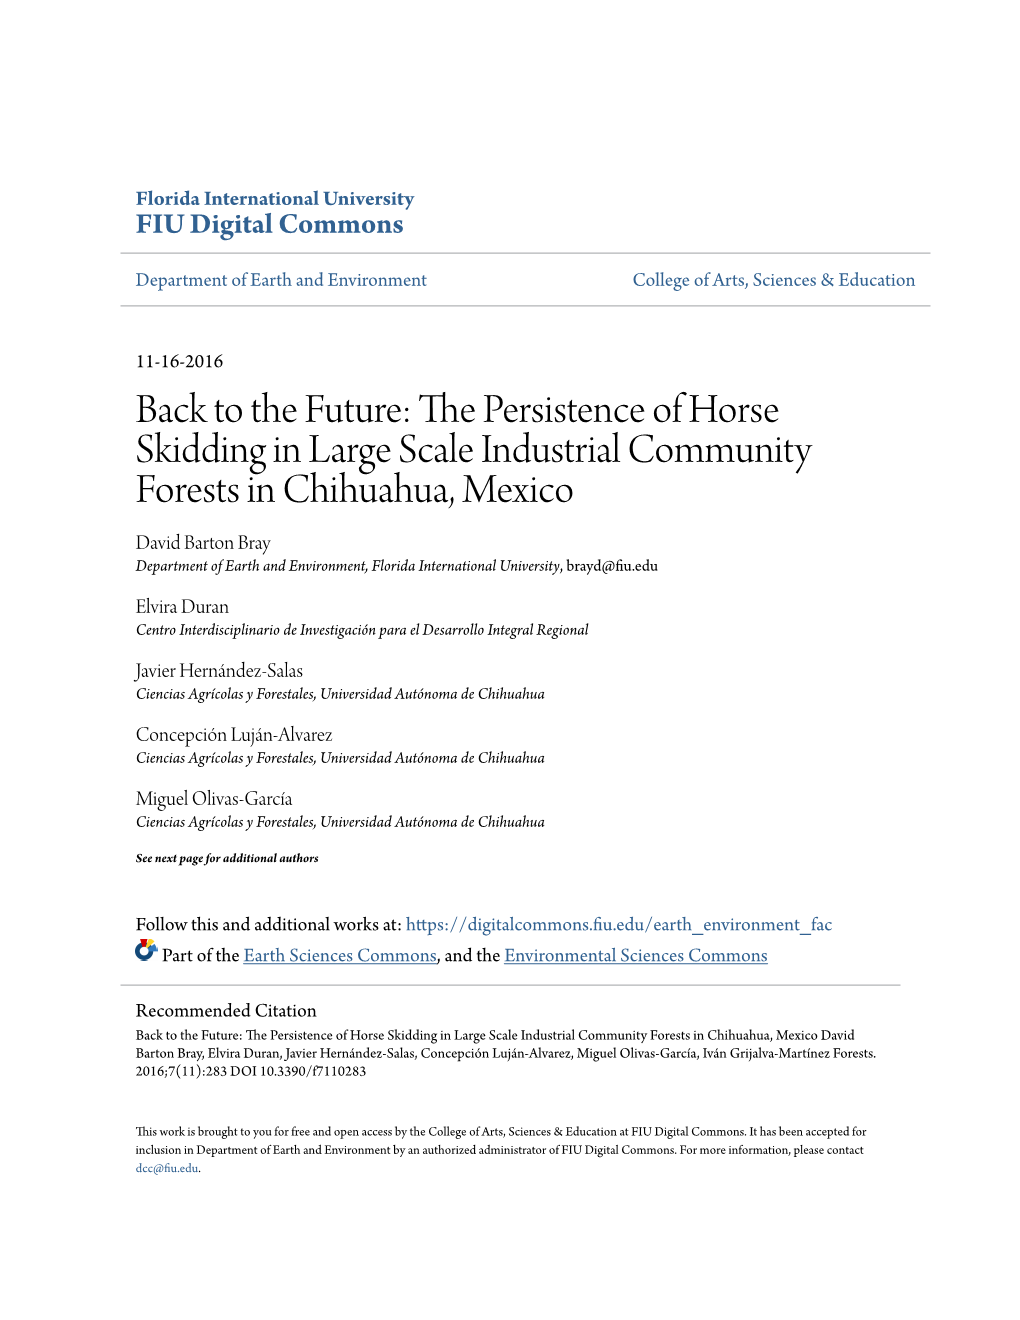 The Persistence of Horse Skidding in Large Scale Industrial Community Forests in Chihuahua, Mexico